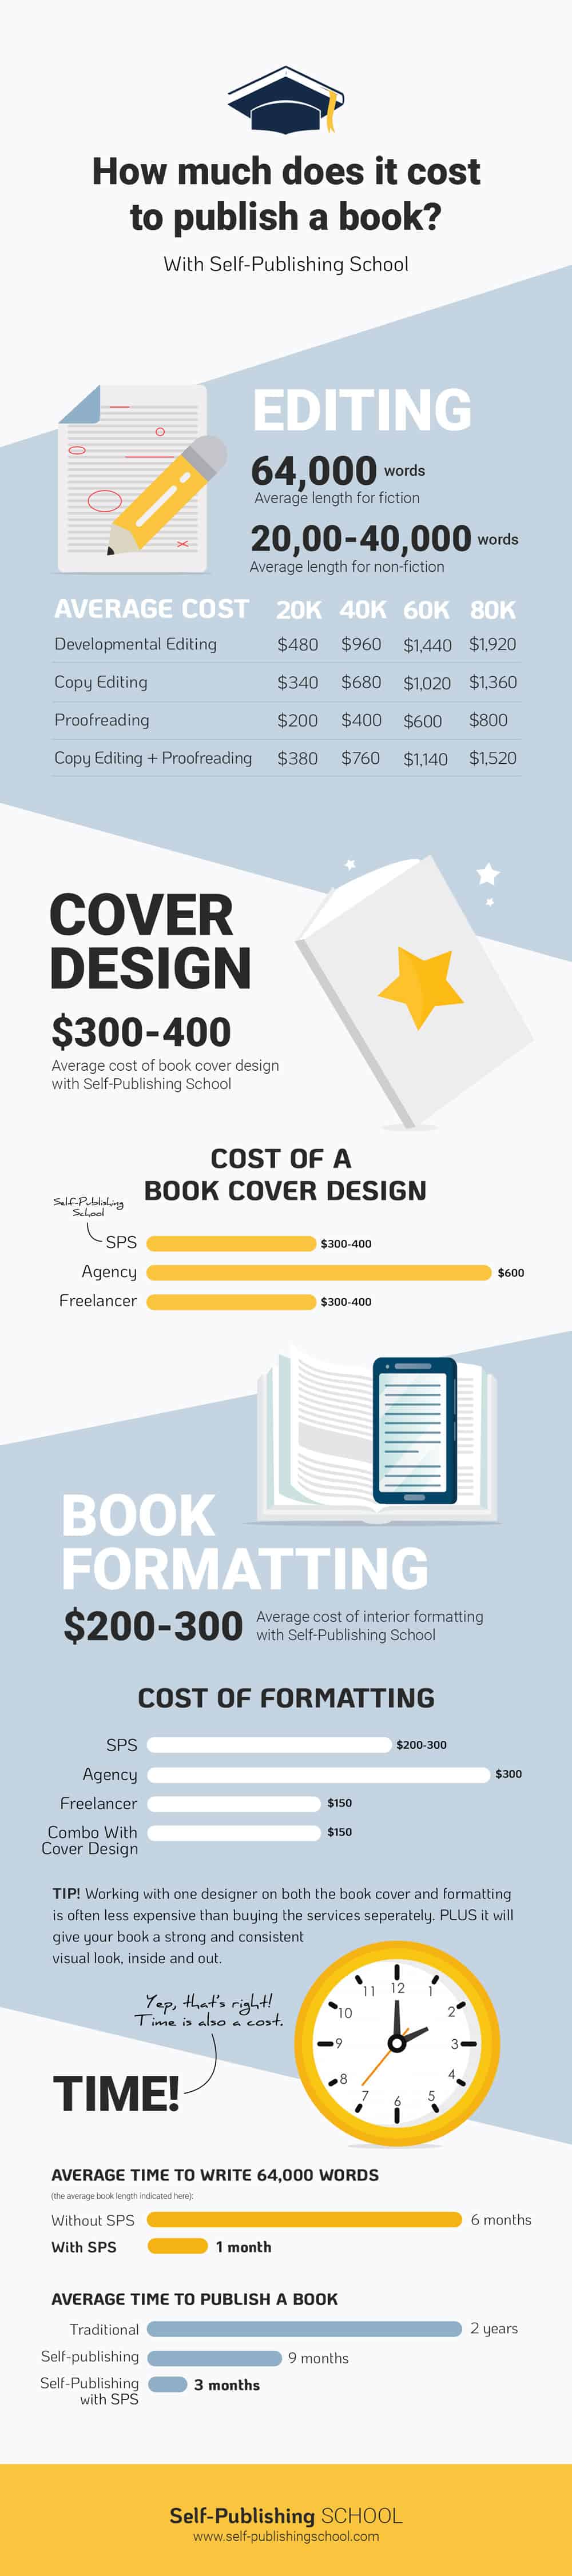 How Much Does it Cost to Publish a Book? Total Expenses